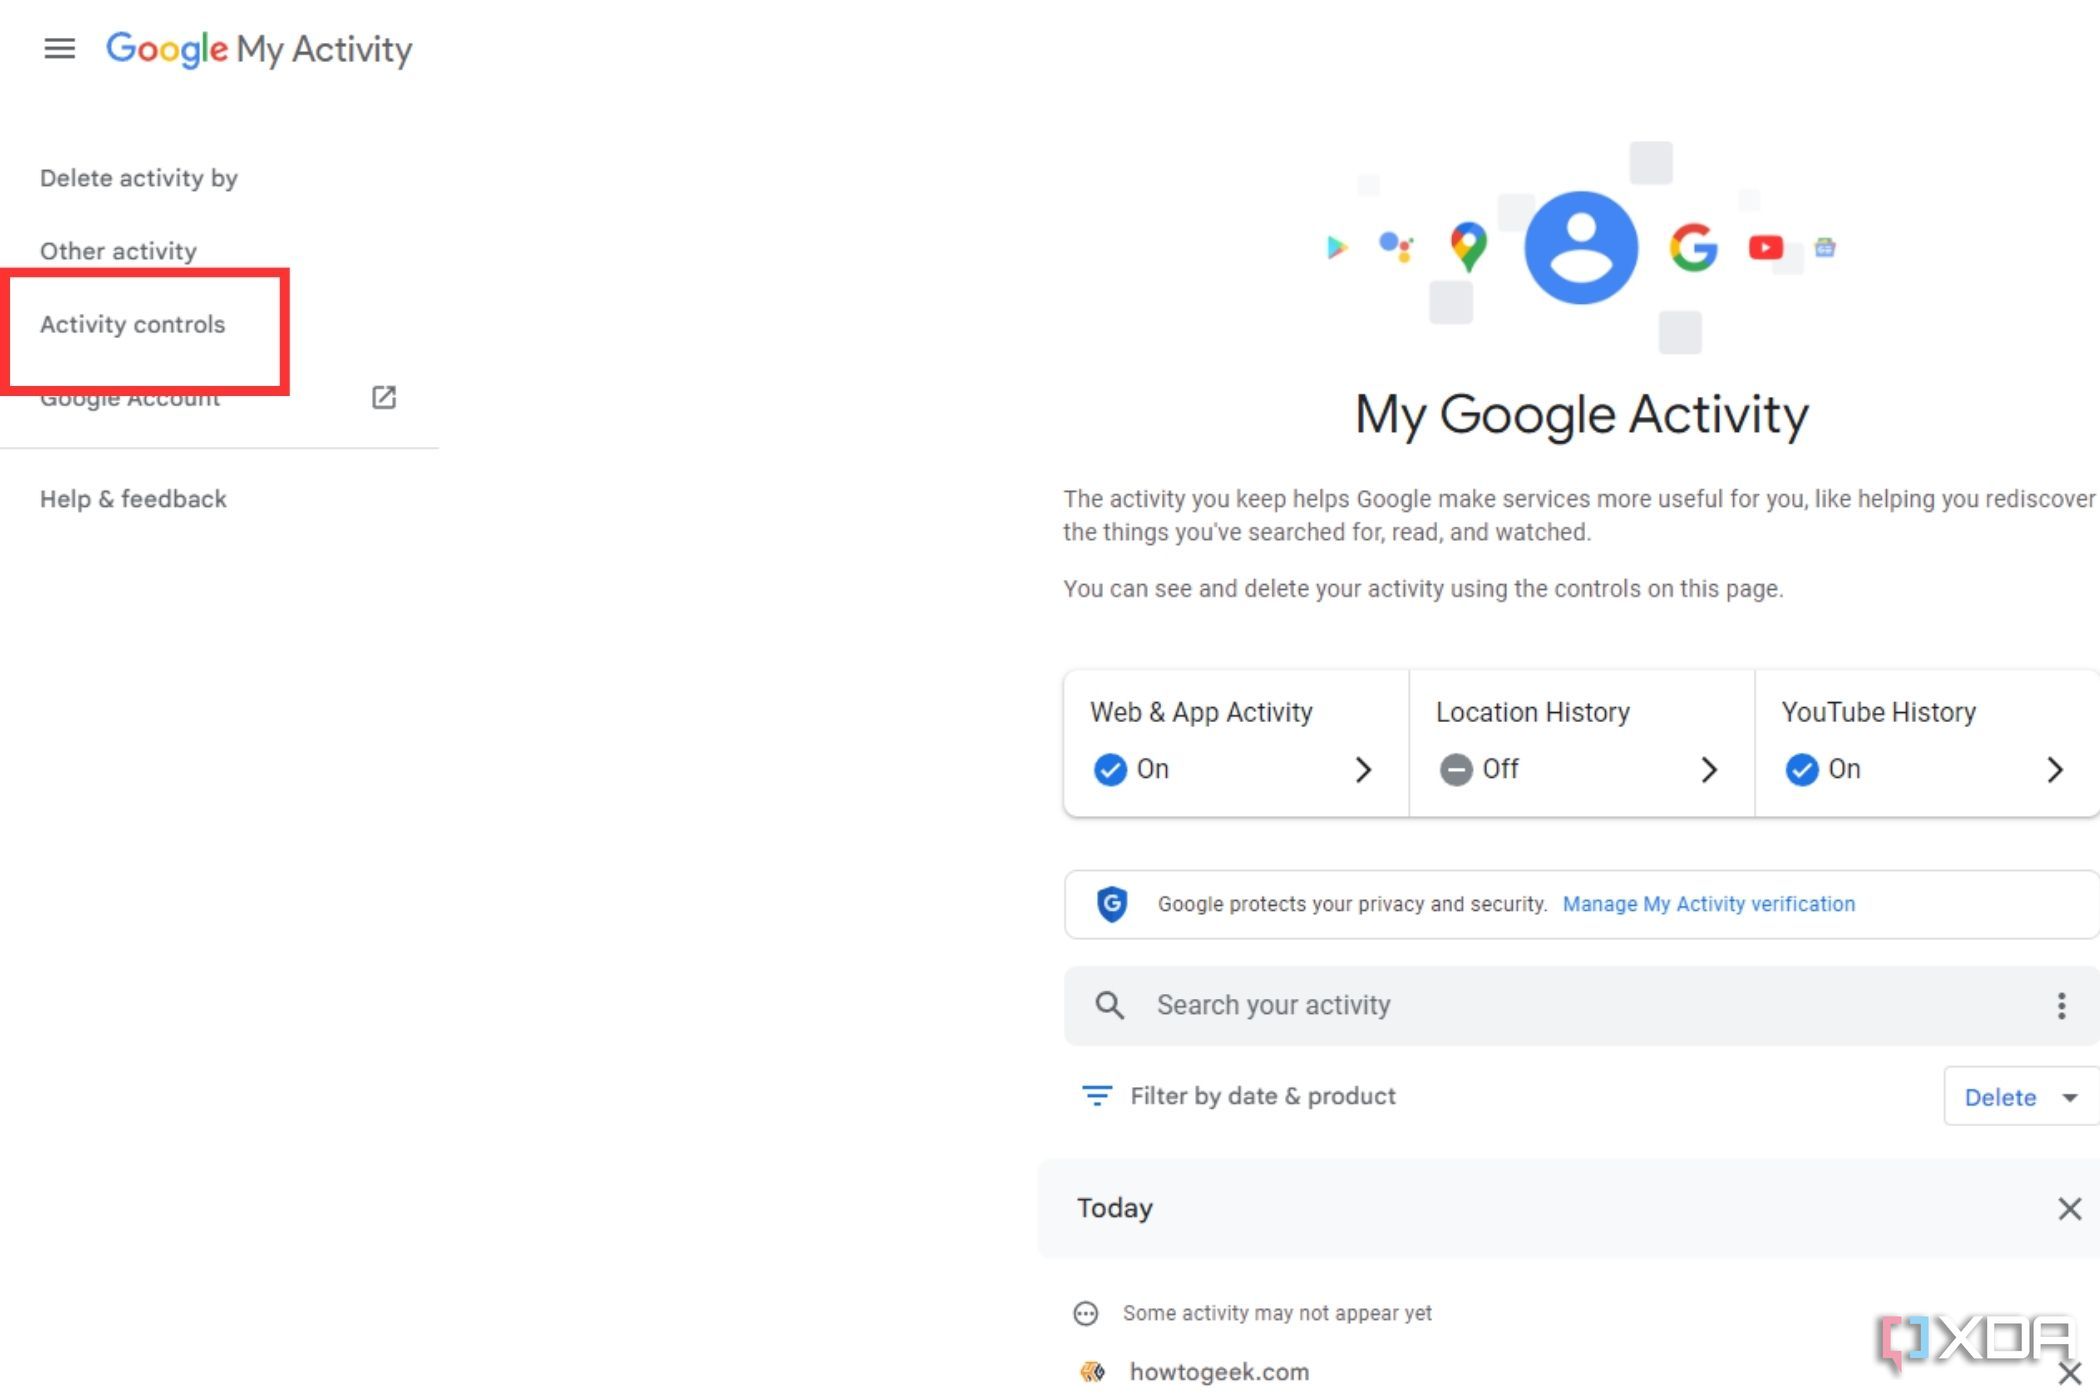 A screenshot showing the highlighted Activity controls in Google's My Activity window.